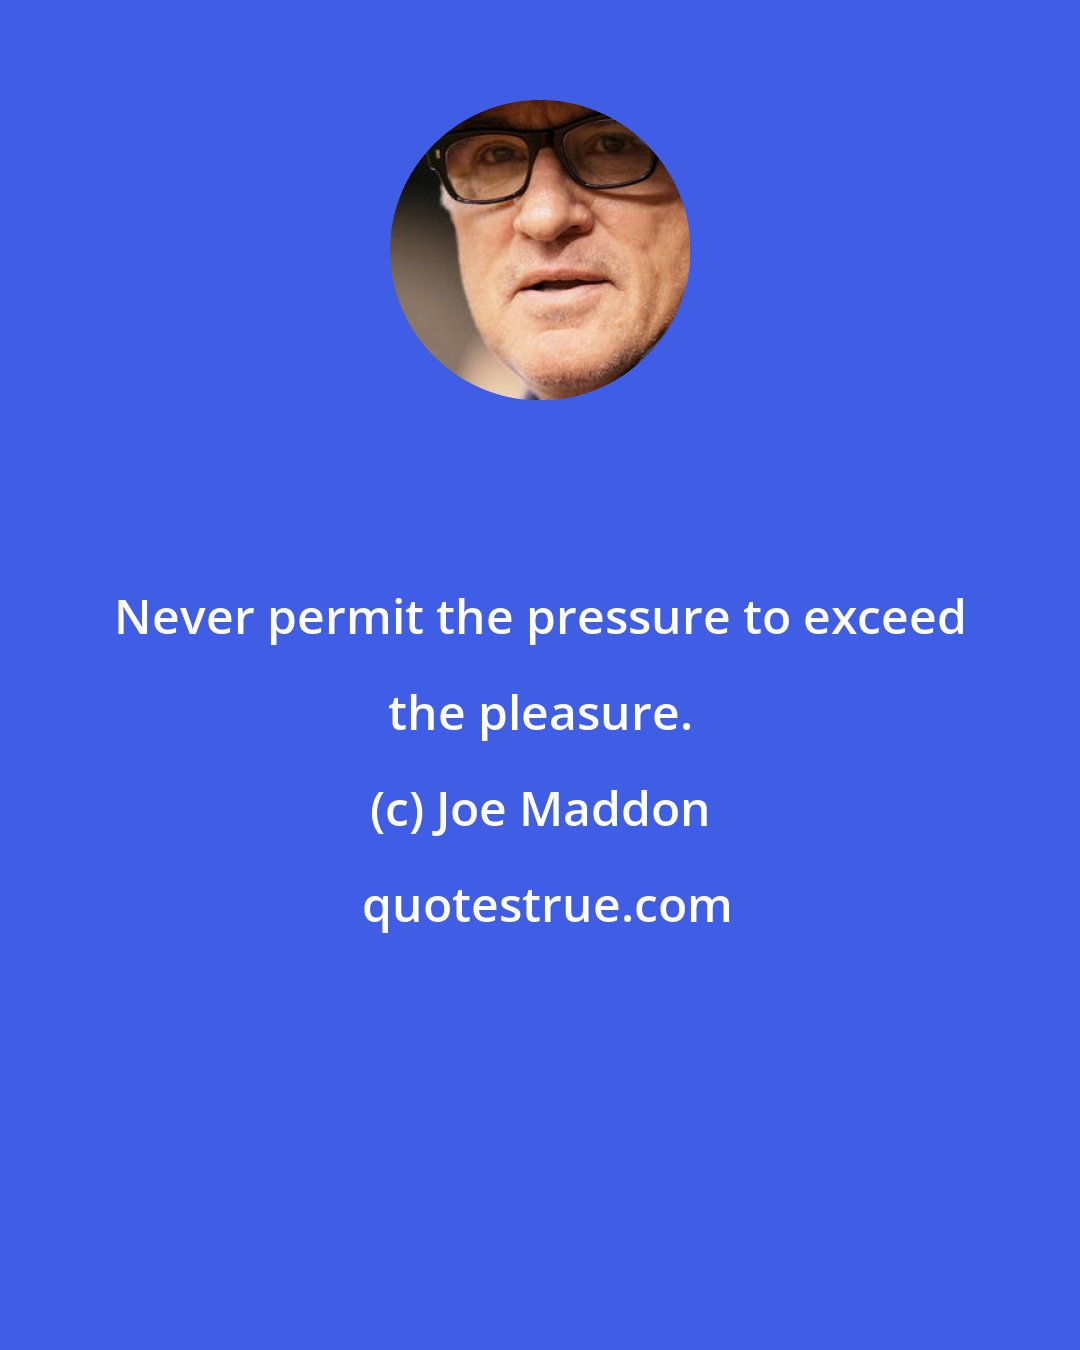 Joe Maddon: Never permit the pressure to exceed the pleasure.